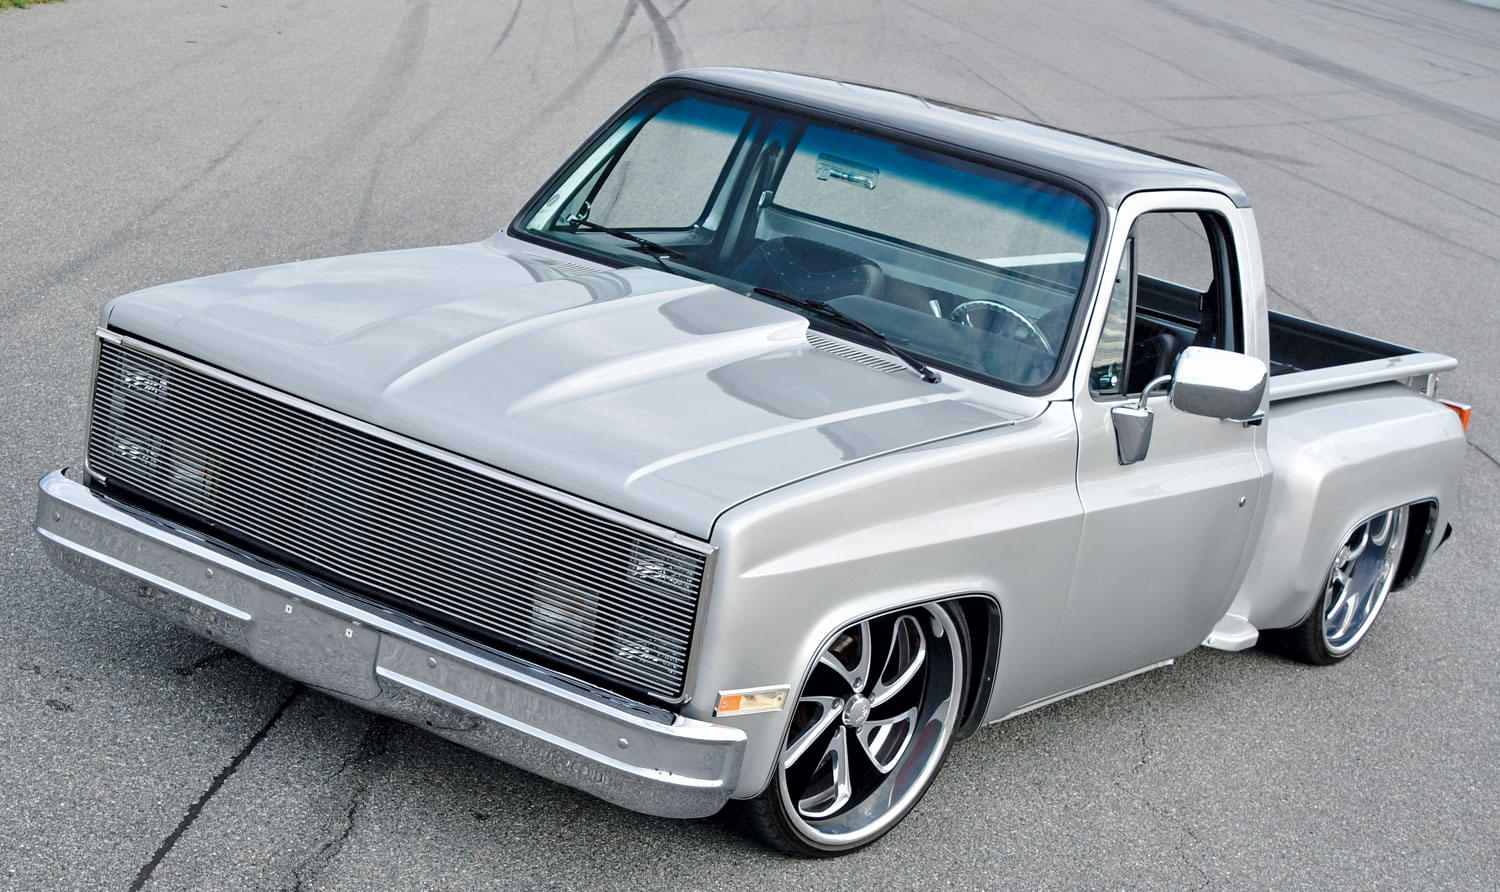 '80 Chevy Stepside frontend